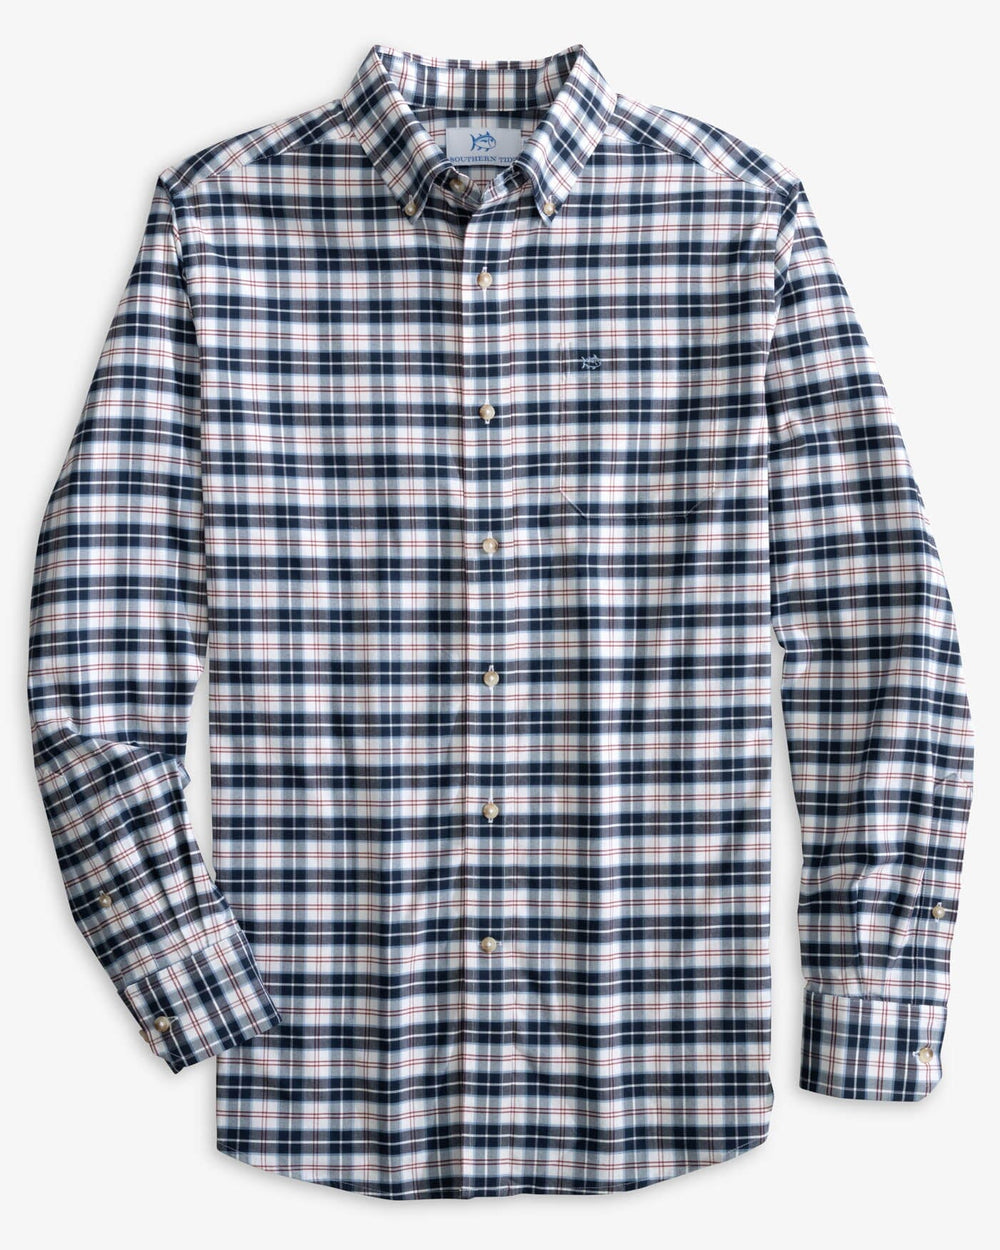 The front view of the Southern Tide Coastal Passage Dearview Plaid Sport Shirt by Southern Tide - Dress Blue